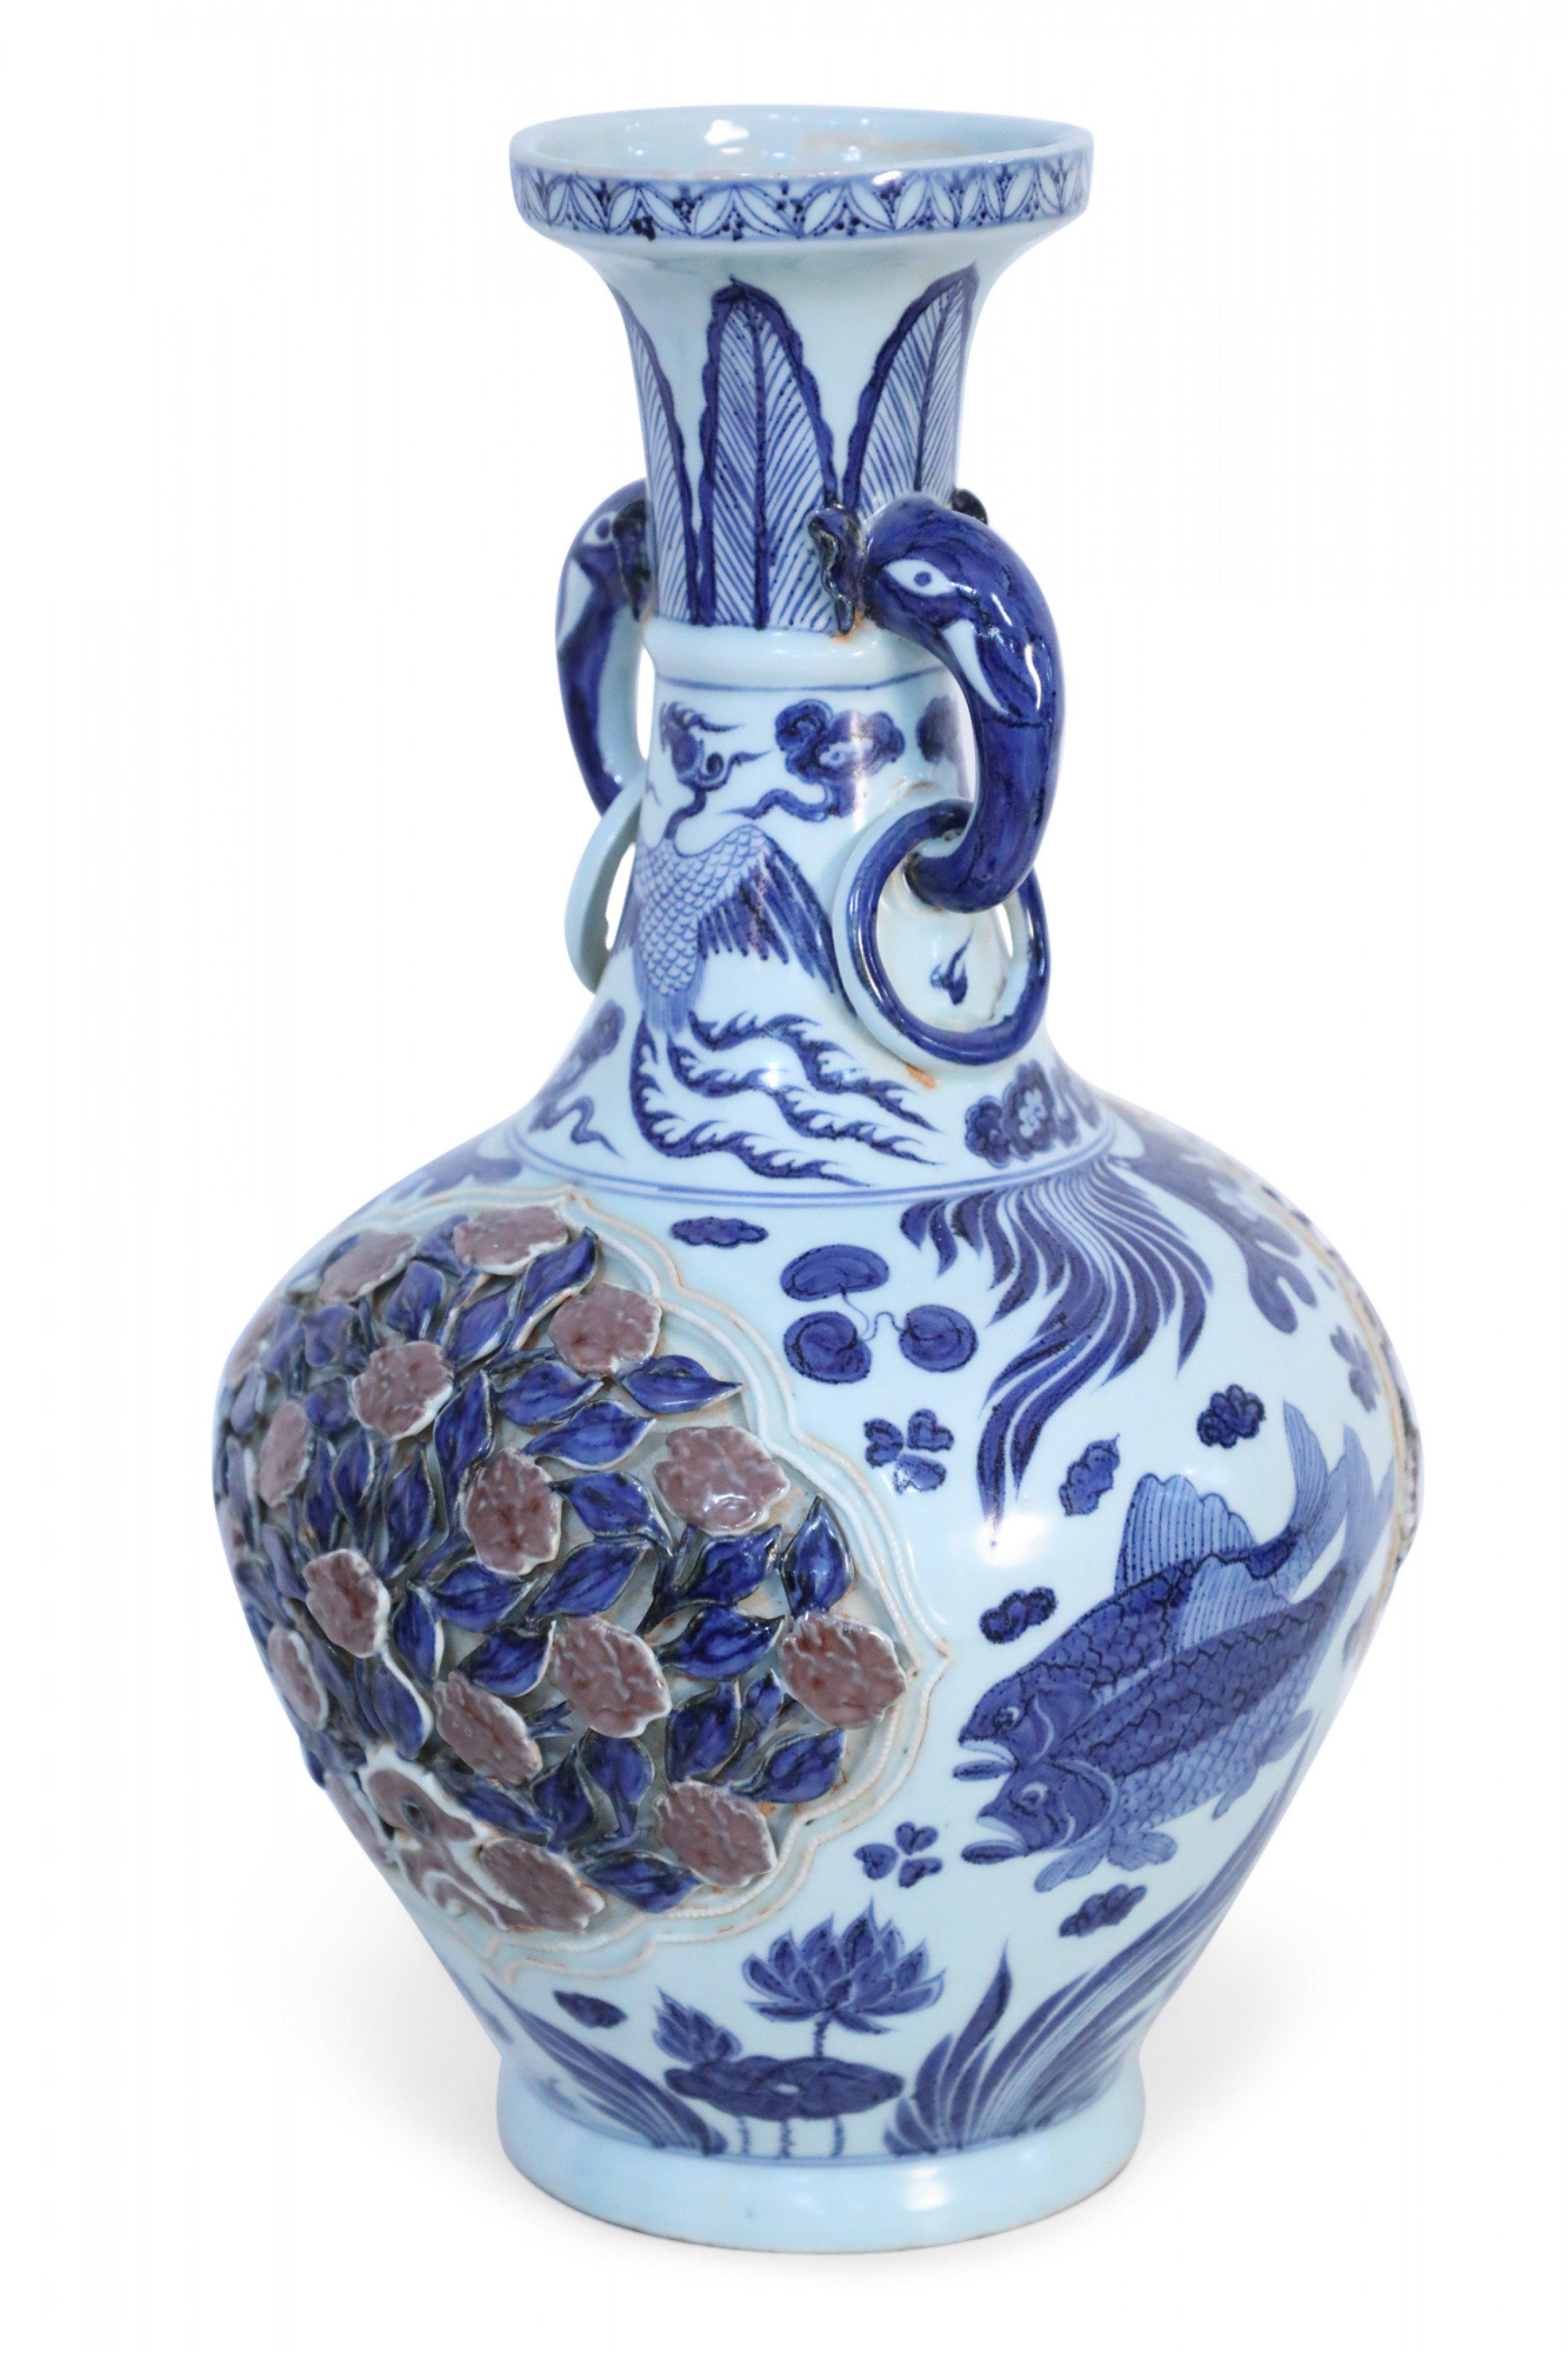 Chinese white porcelain vase with a bulbous body decorated in blue koi, cranes, clouds and vegetation, surrounding a central raised, pierced rose bush on each side. The thin neck features a band of blue feathers leading up the opening, and two